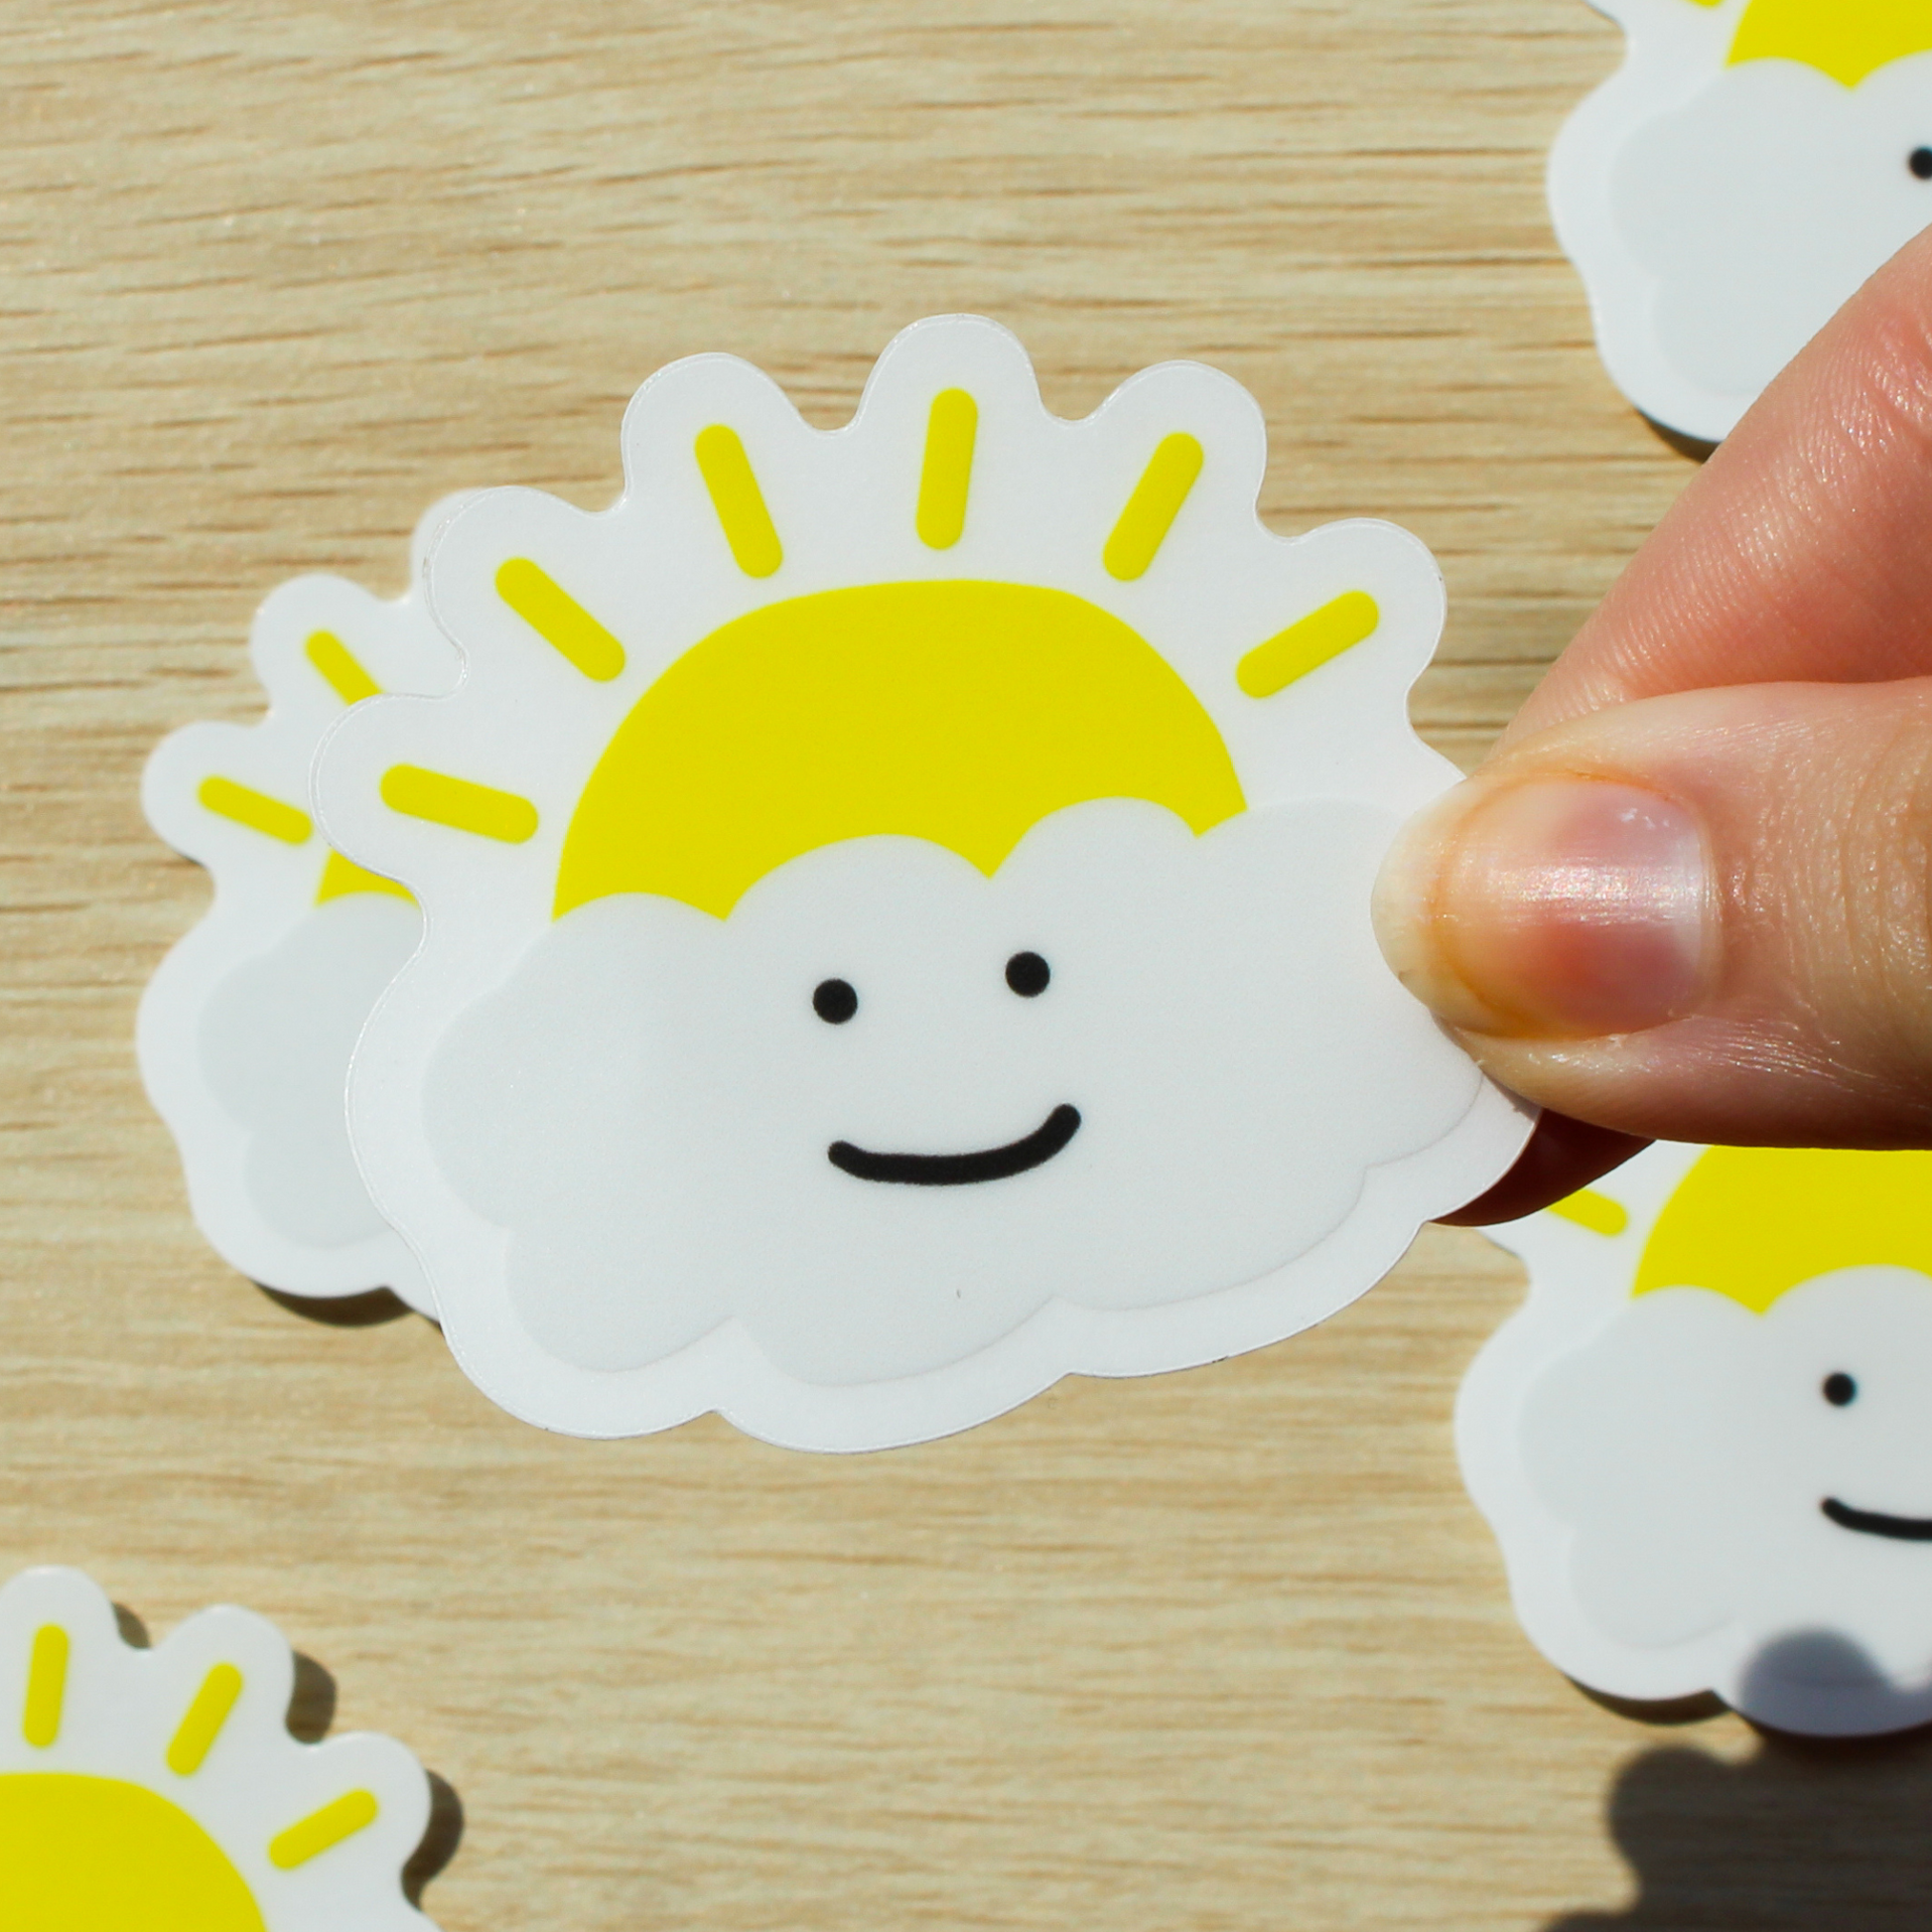 Background is wood with more happy cloud stickers. In front is a hand holding a happy cloud sticker with a sun popping out behind it.